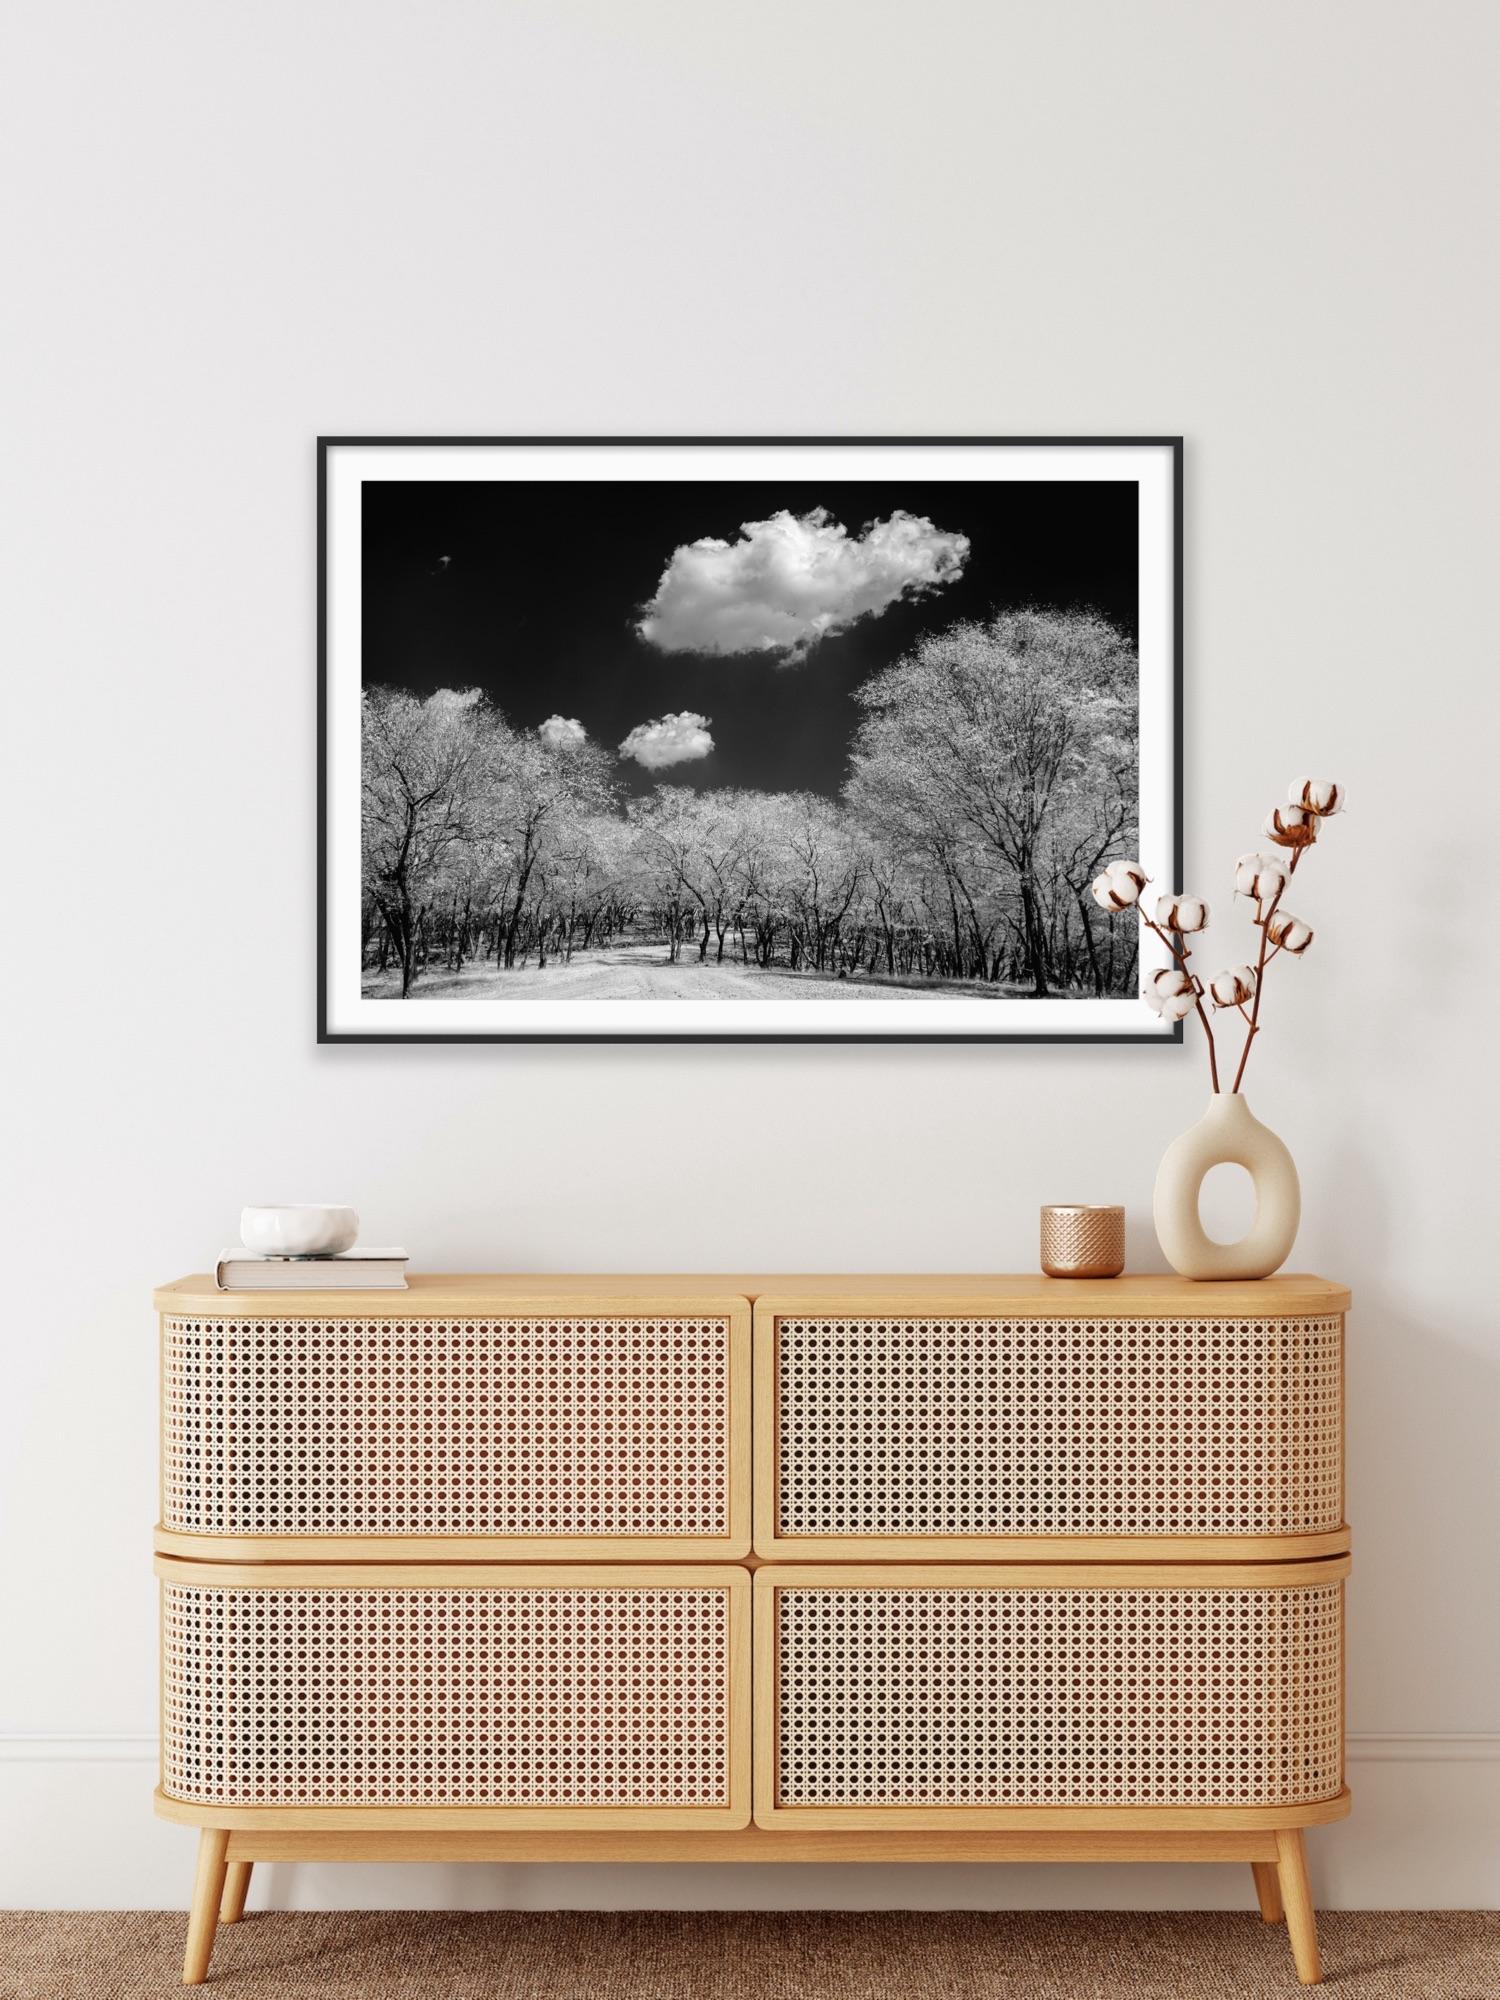 Surreal Black White Landscape Photograph Nature Wildlife India Trees Clouds For Sale 10